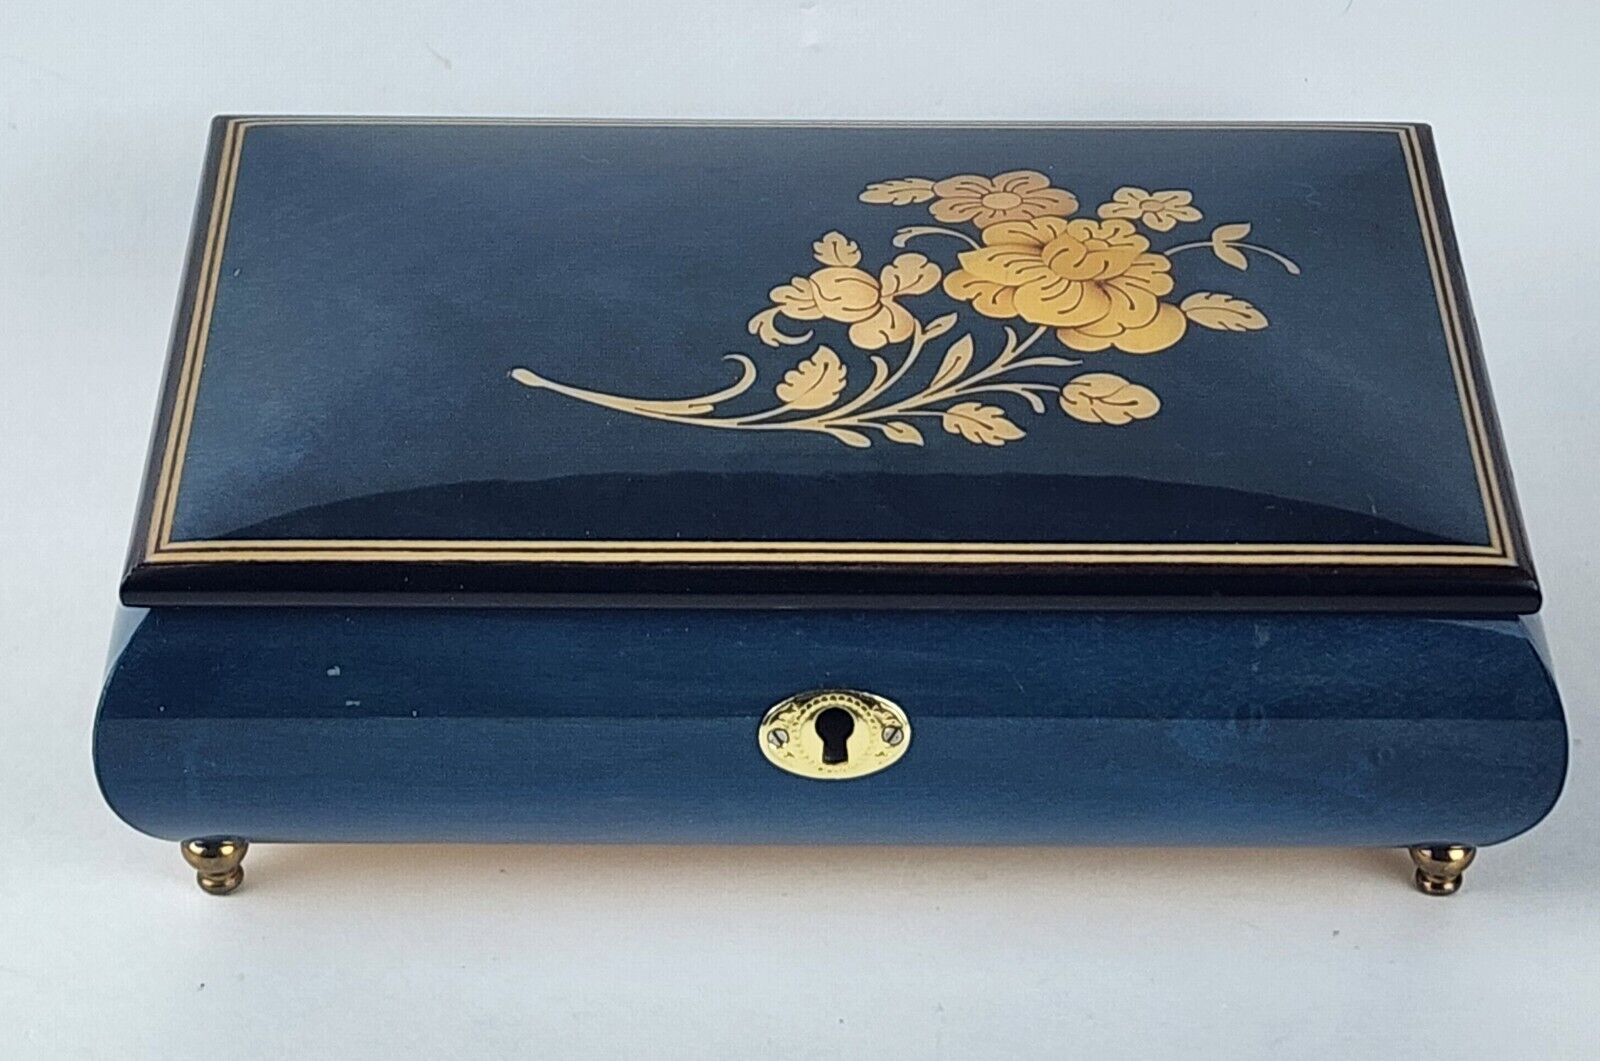 Italian Inlaid Musical Jewelry Box Hand Crafted Teal Blue & Floral, Lara's Theme